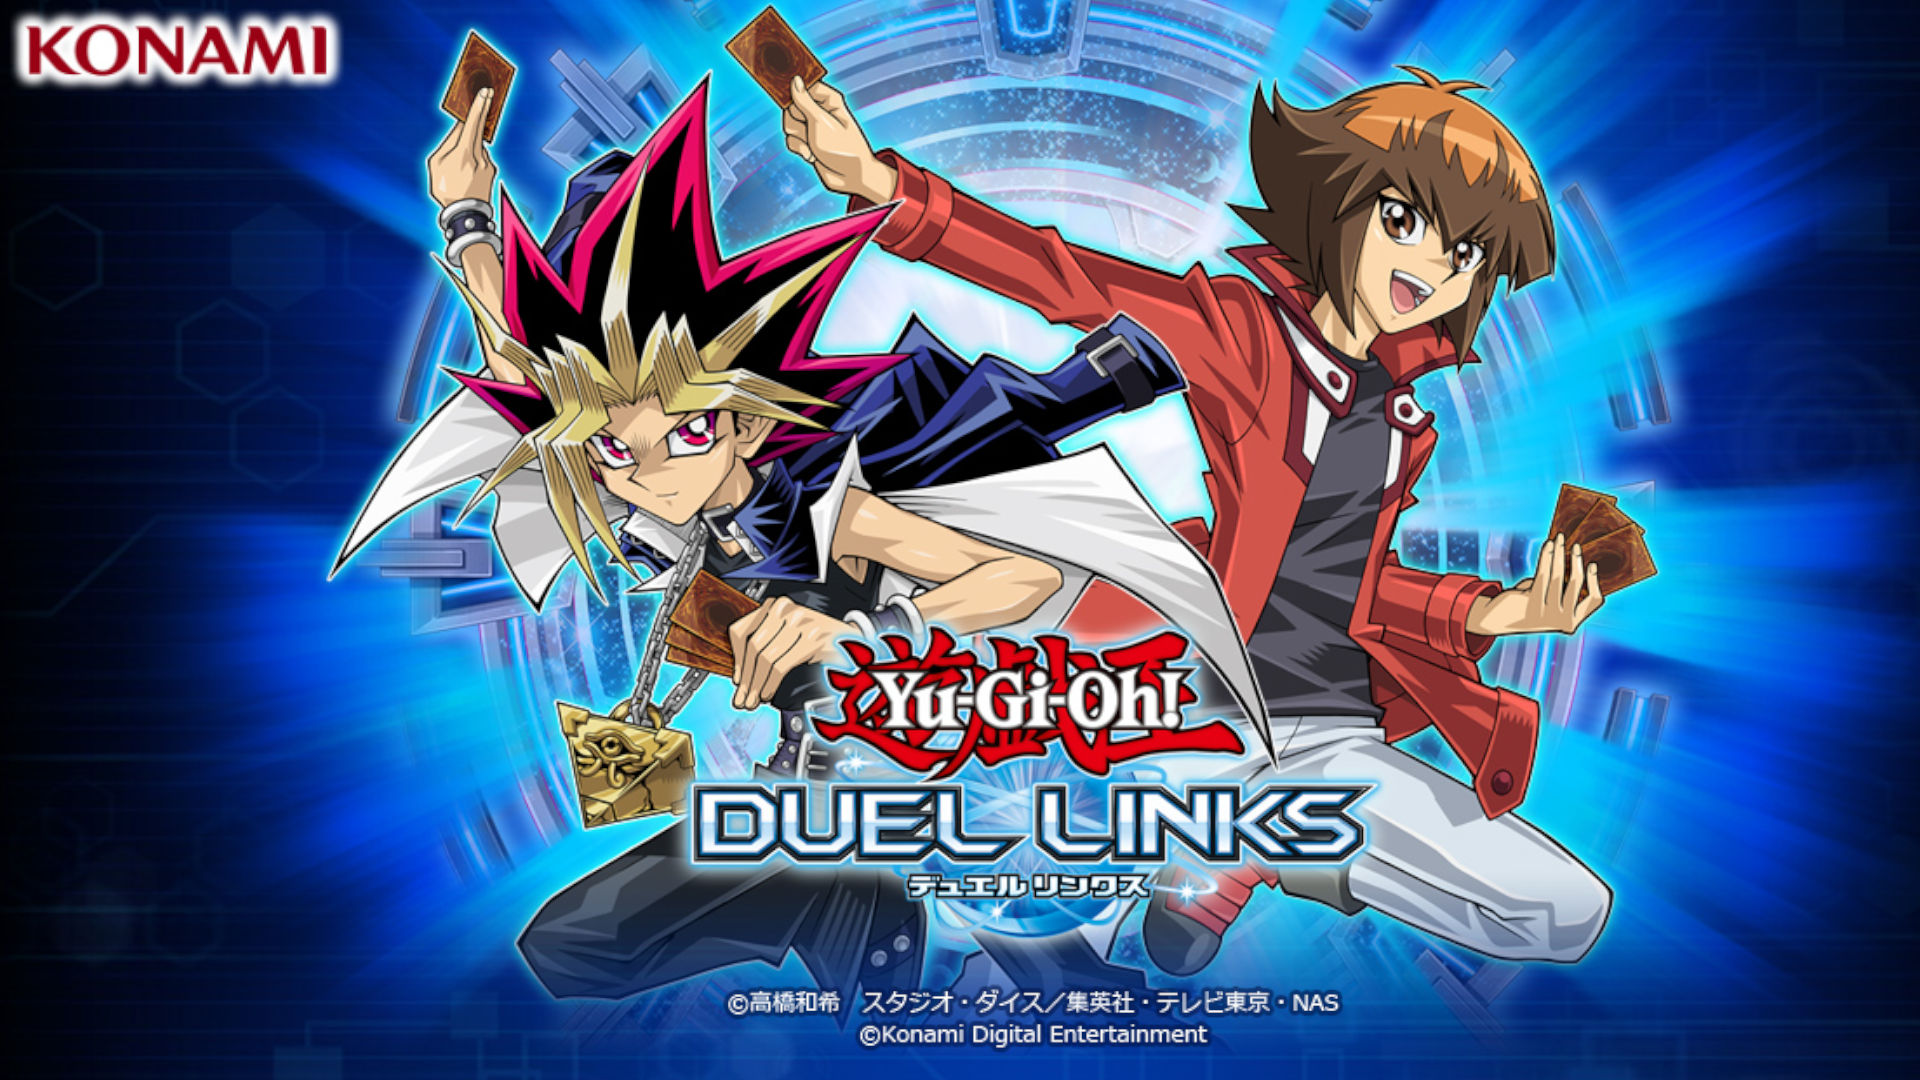 Cover art for Duel Links with Jaden and Yugi drawing cards against an unseen opponen